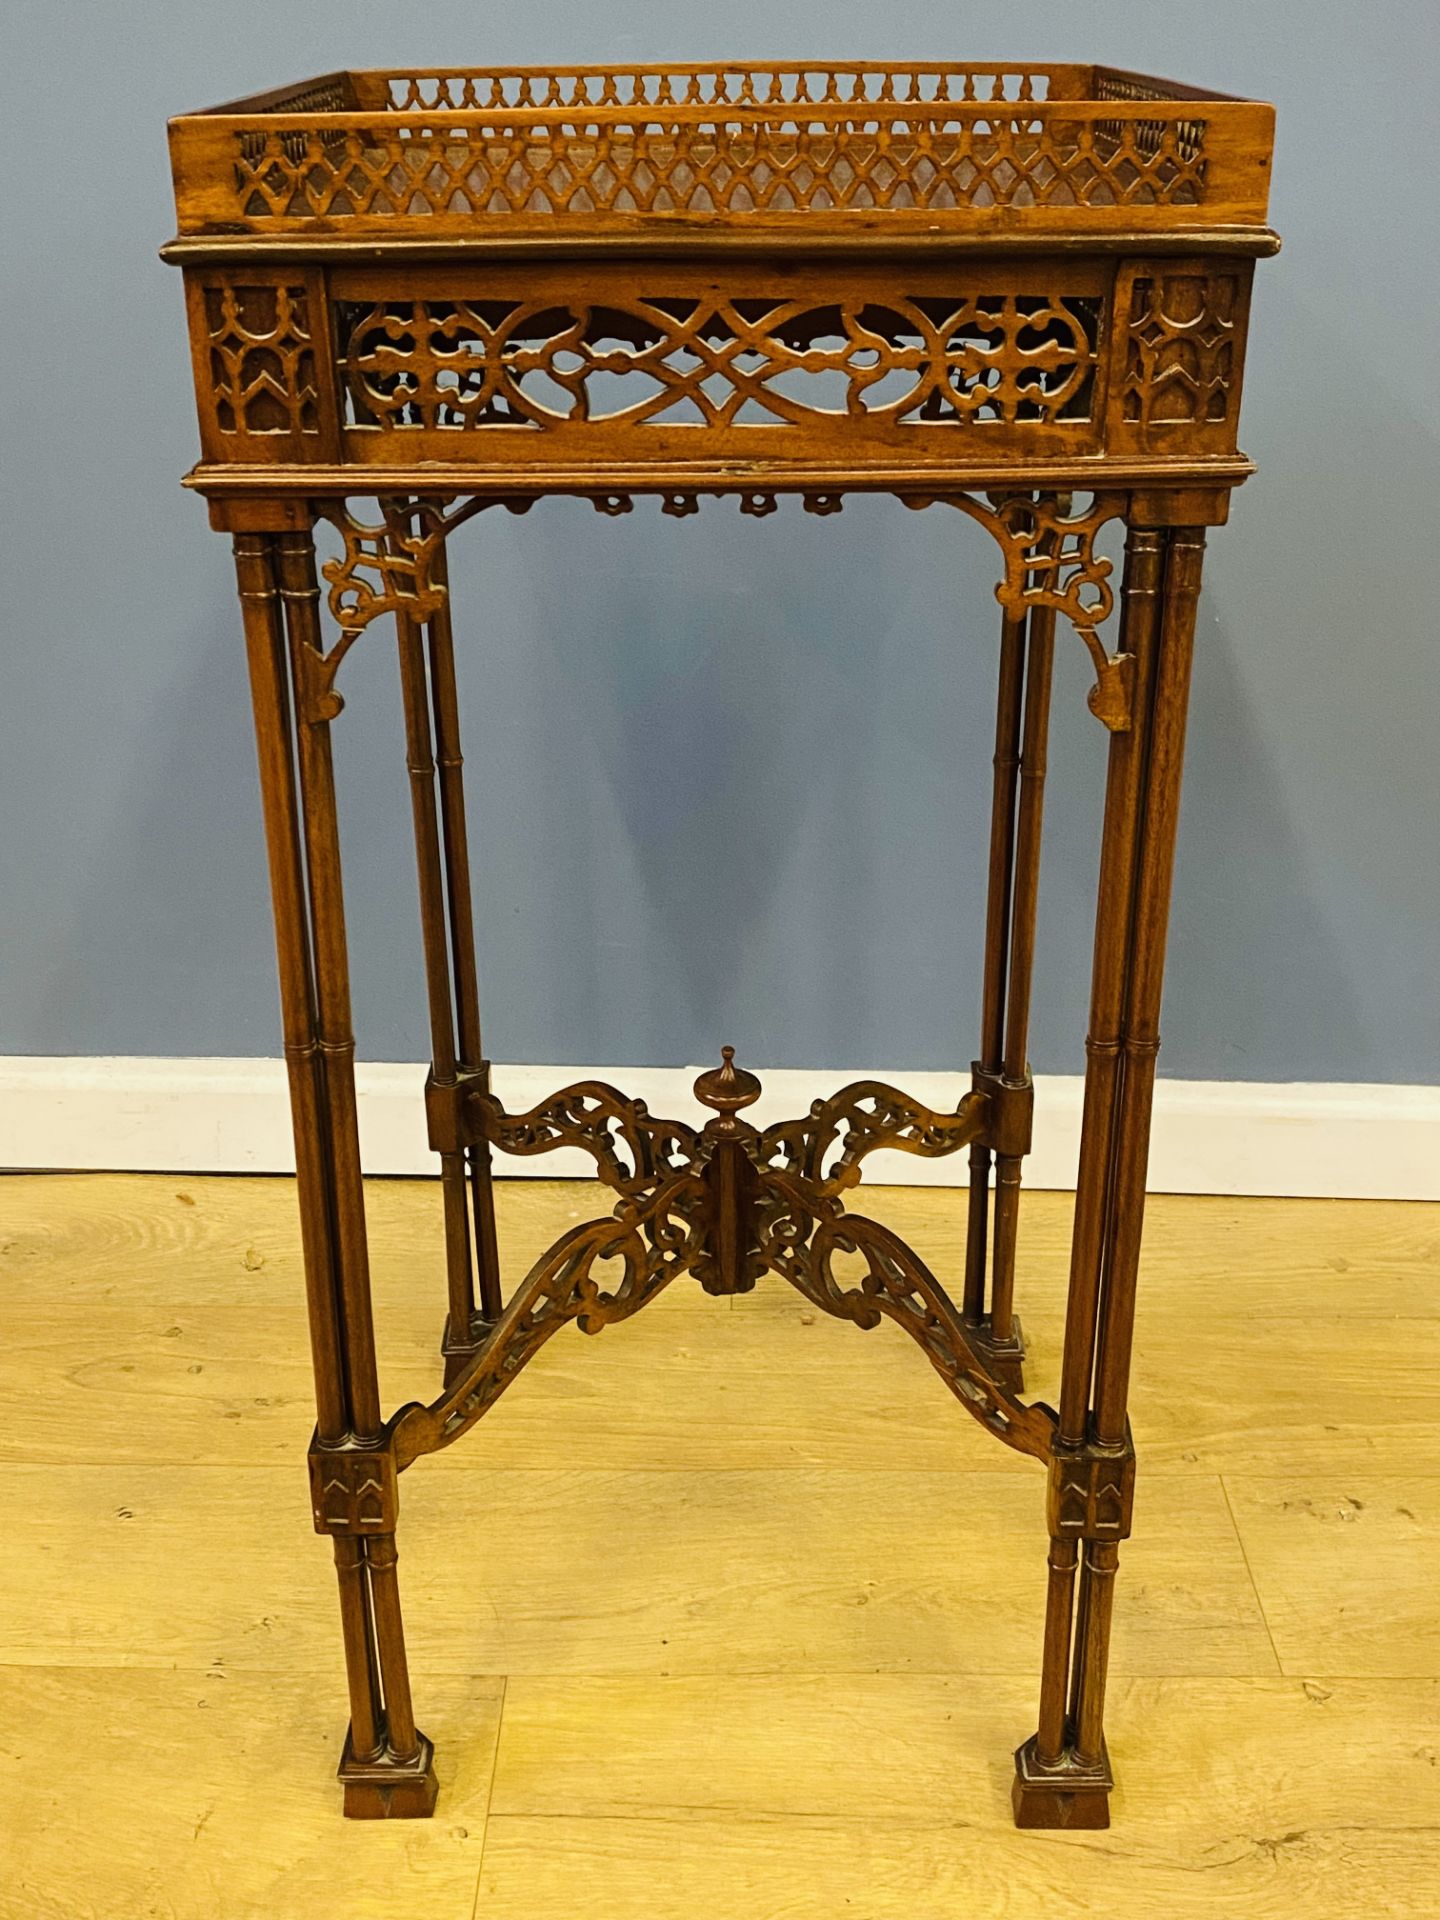 Reproduction Chippendale style mahogany urn stand - Image 5 of 6